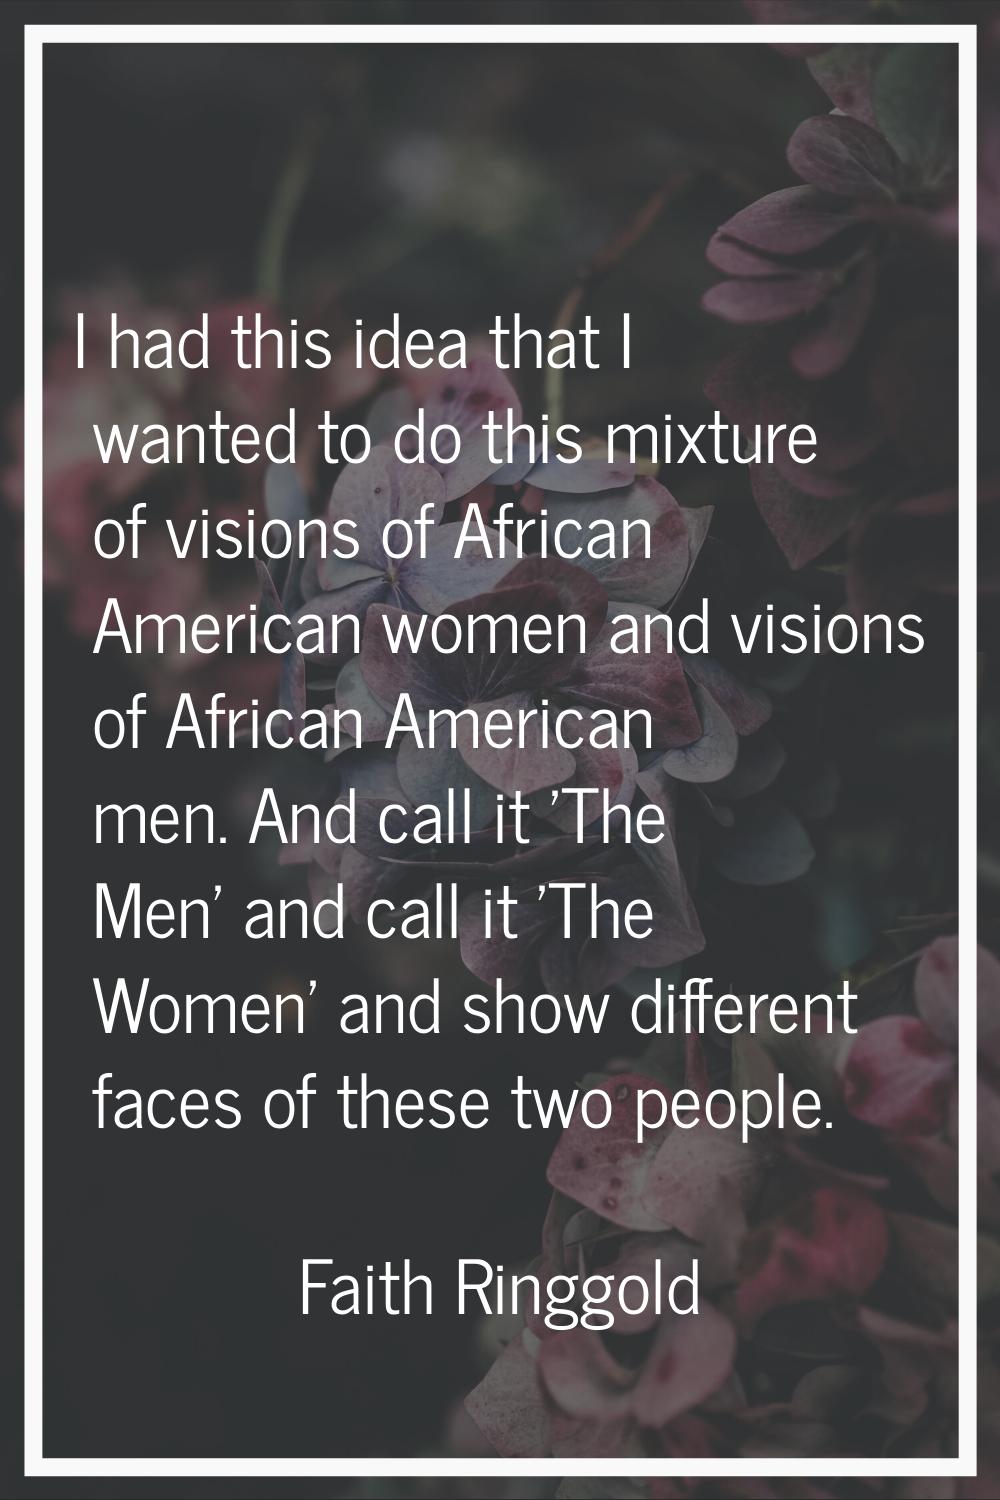 I had this idea that I wanted to do this mixture of visions of African American women and visions o